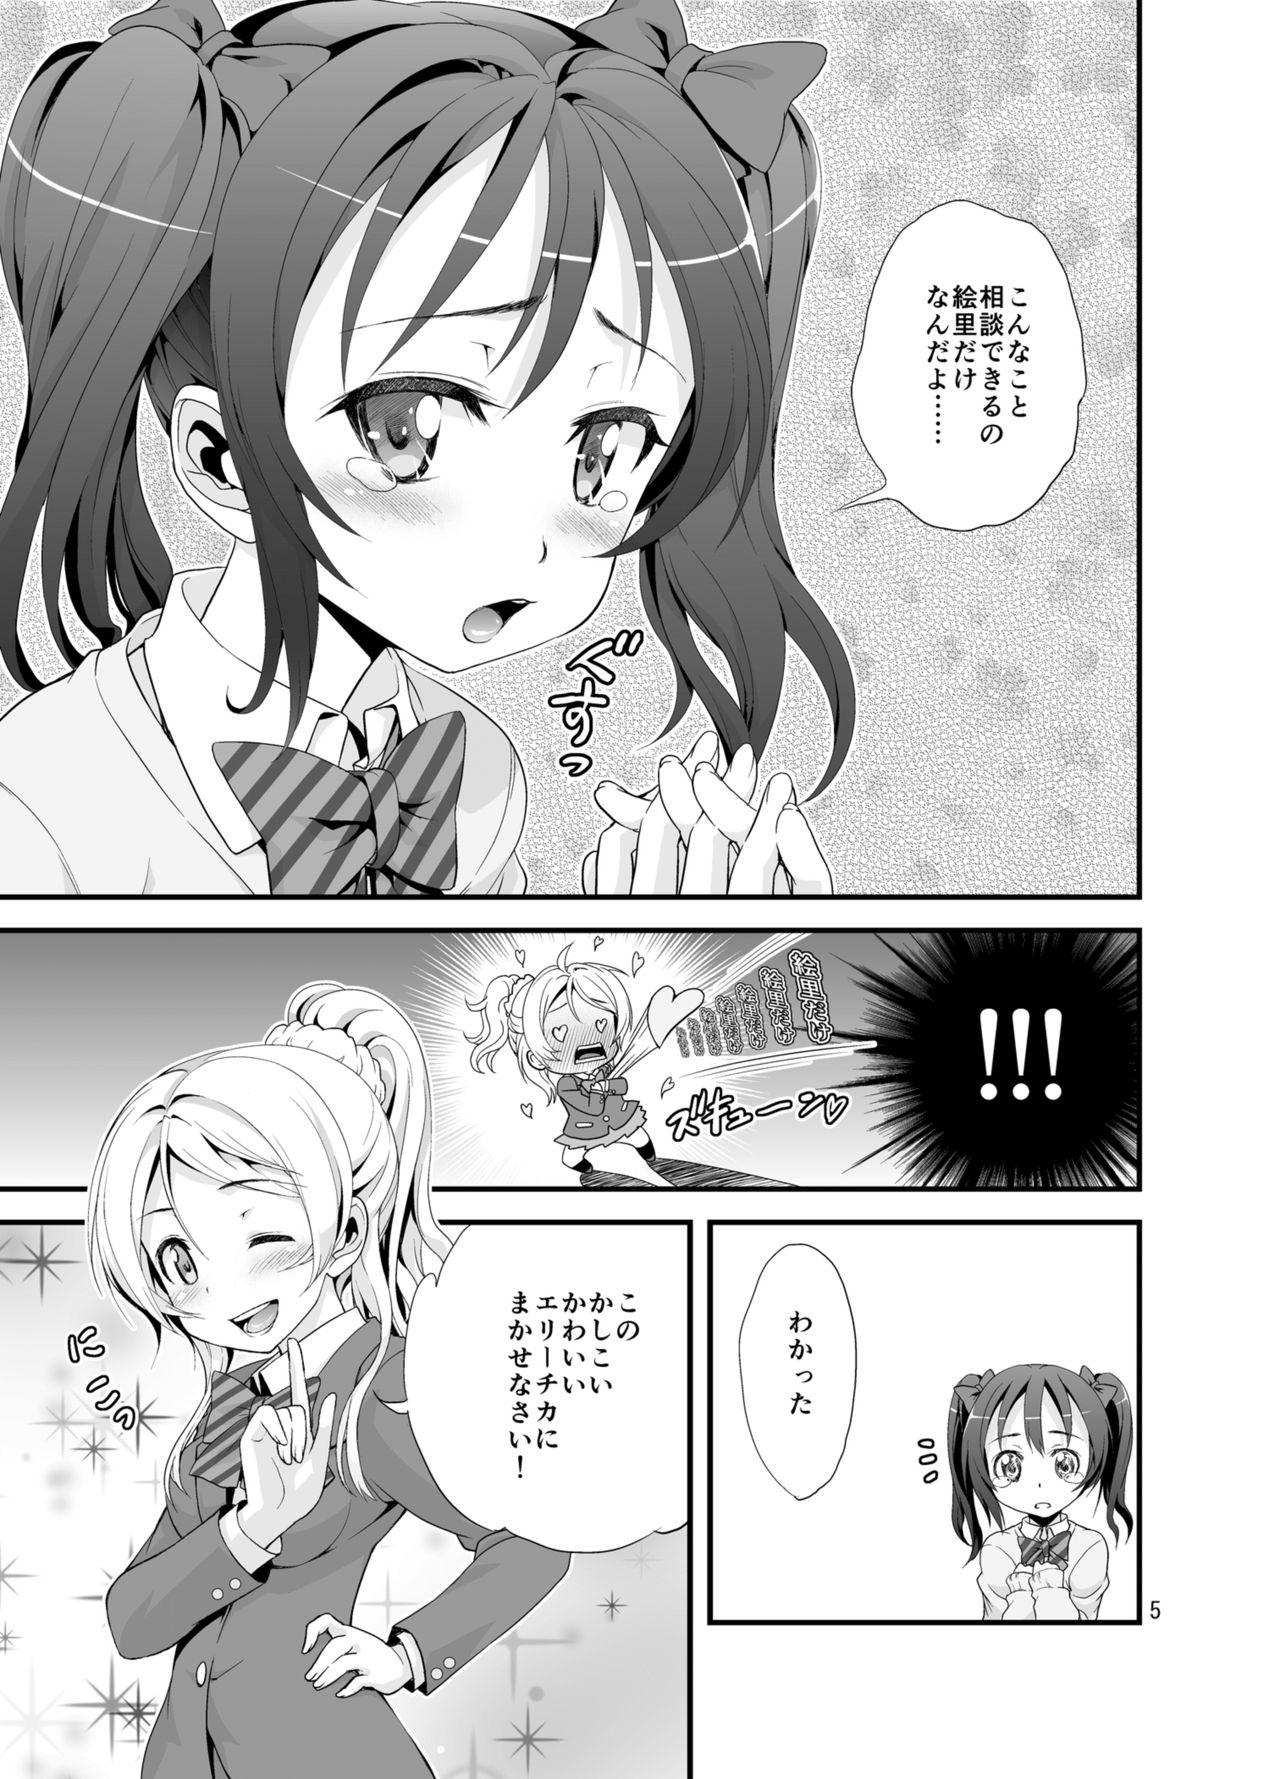 Stroking Nico-chin. - Love live Tribute - Page 5